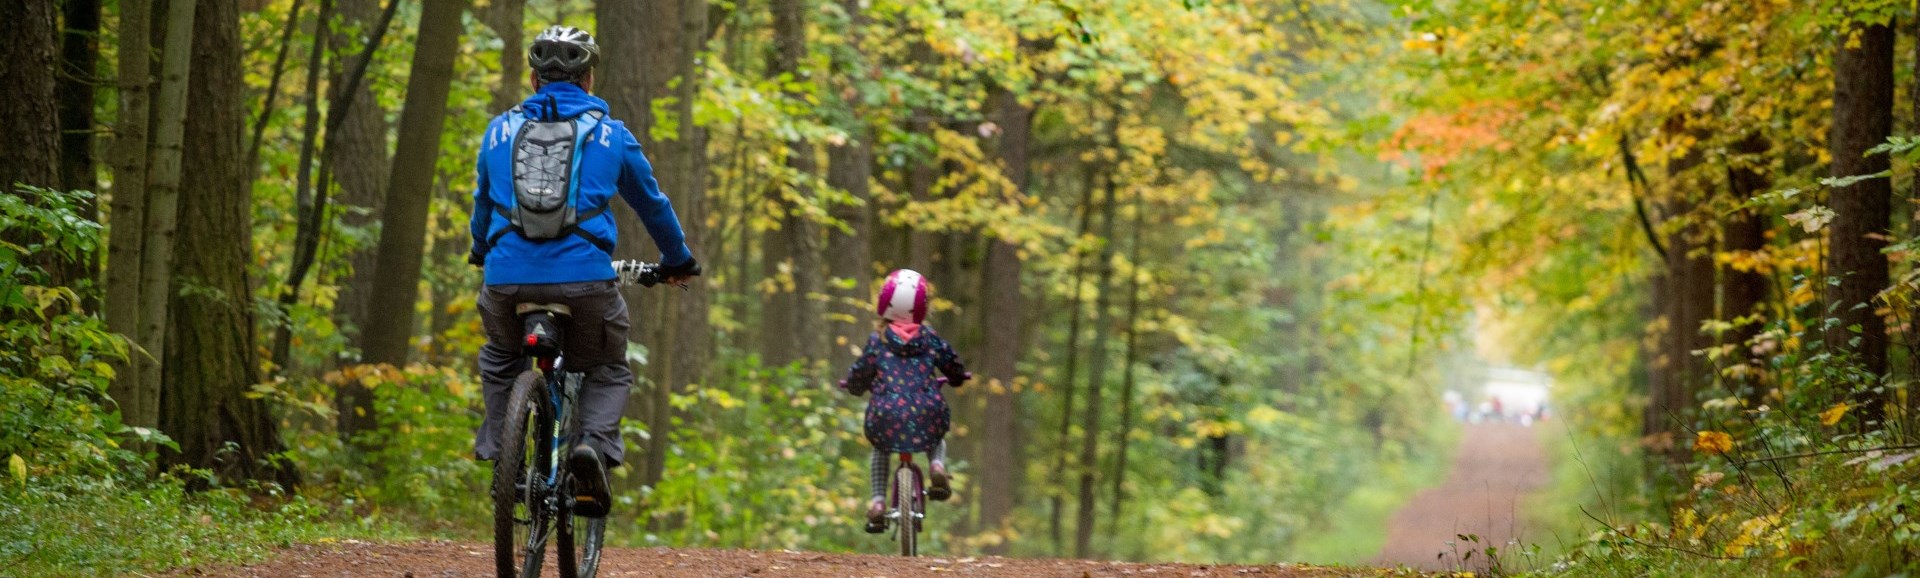 Adult and child mountain biking on trail